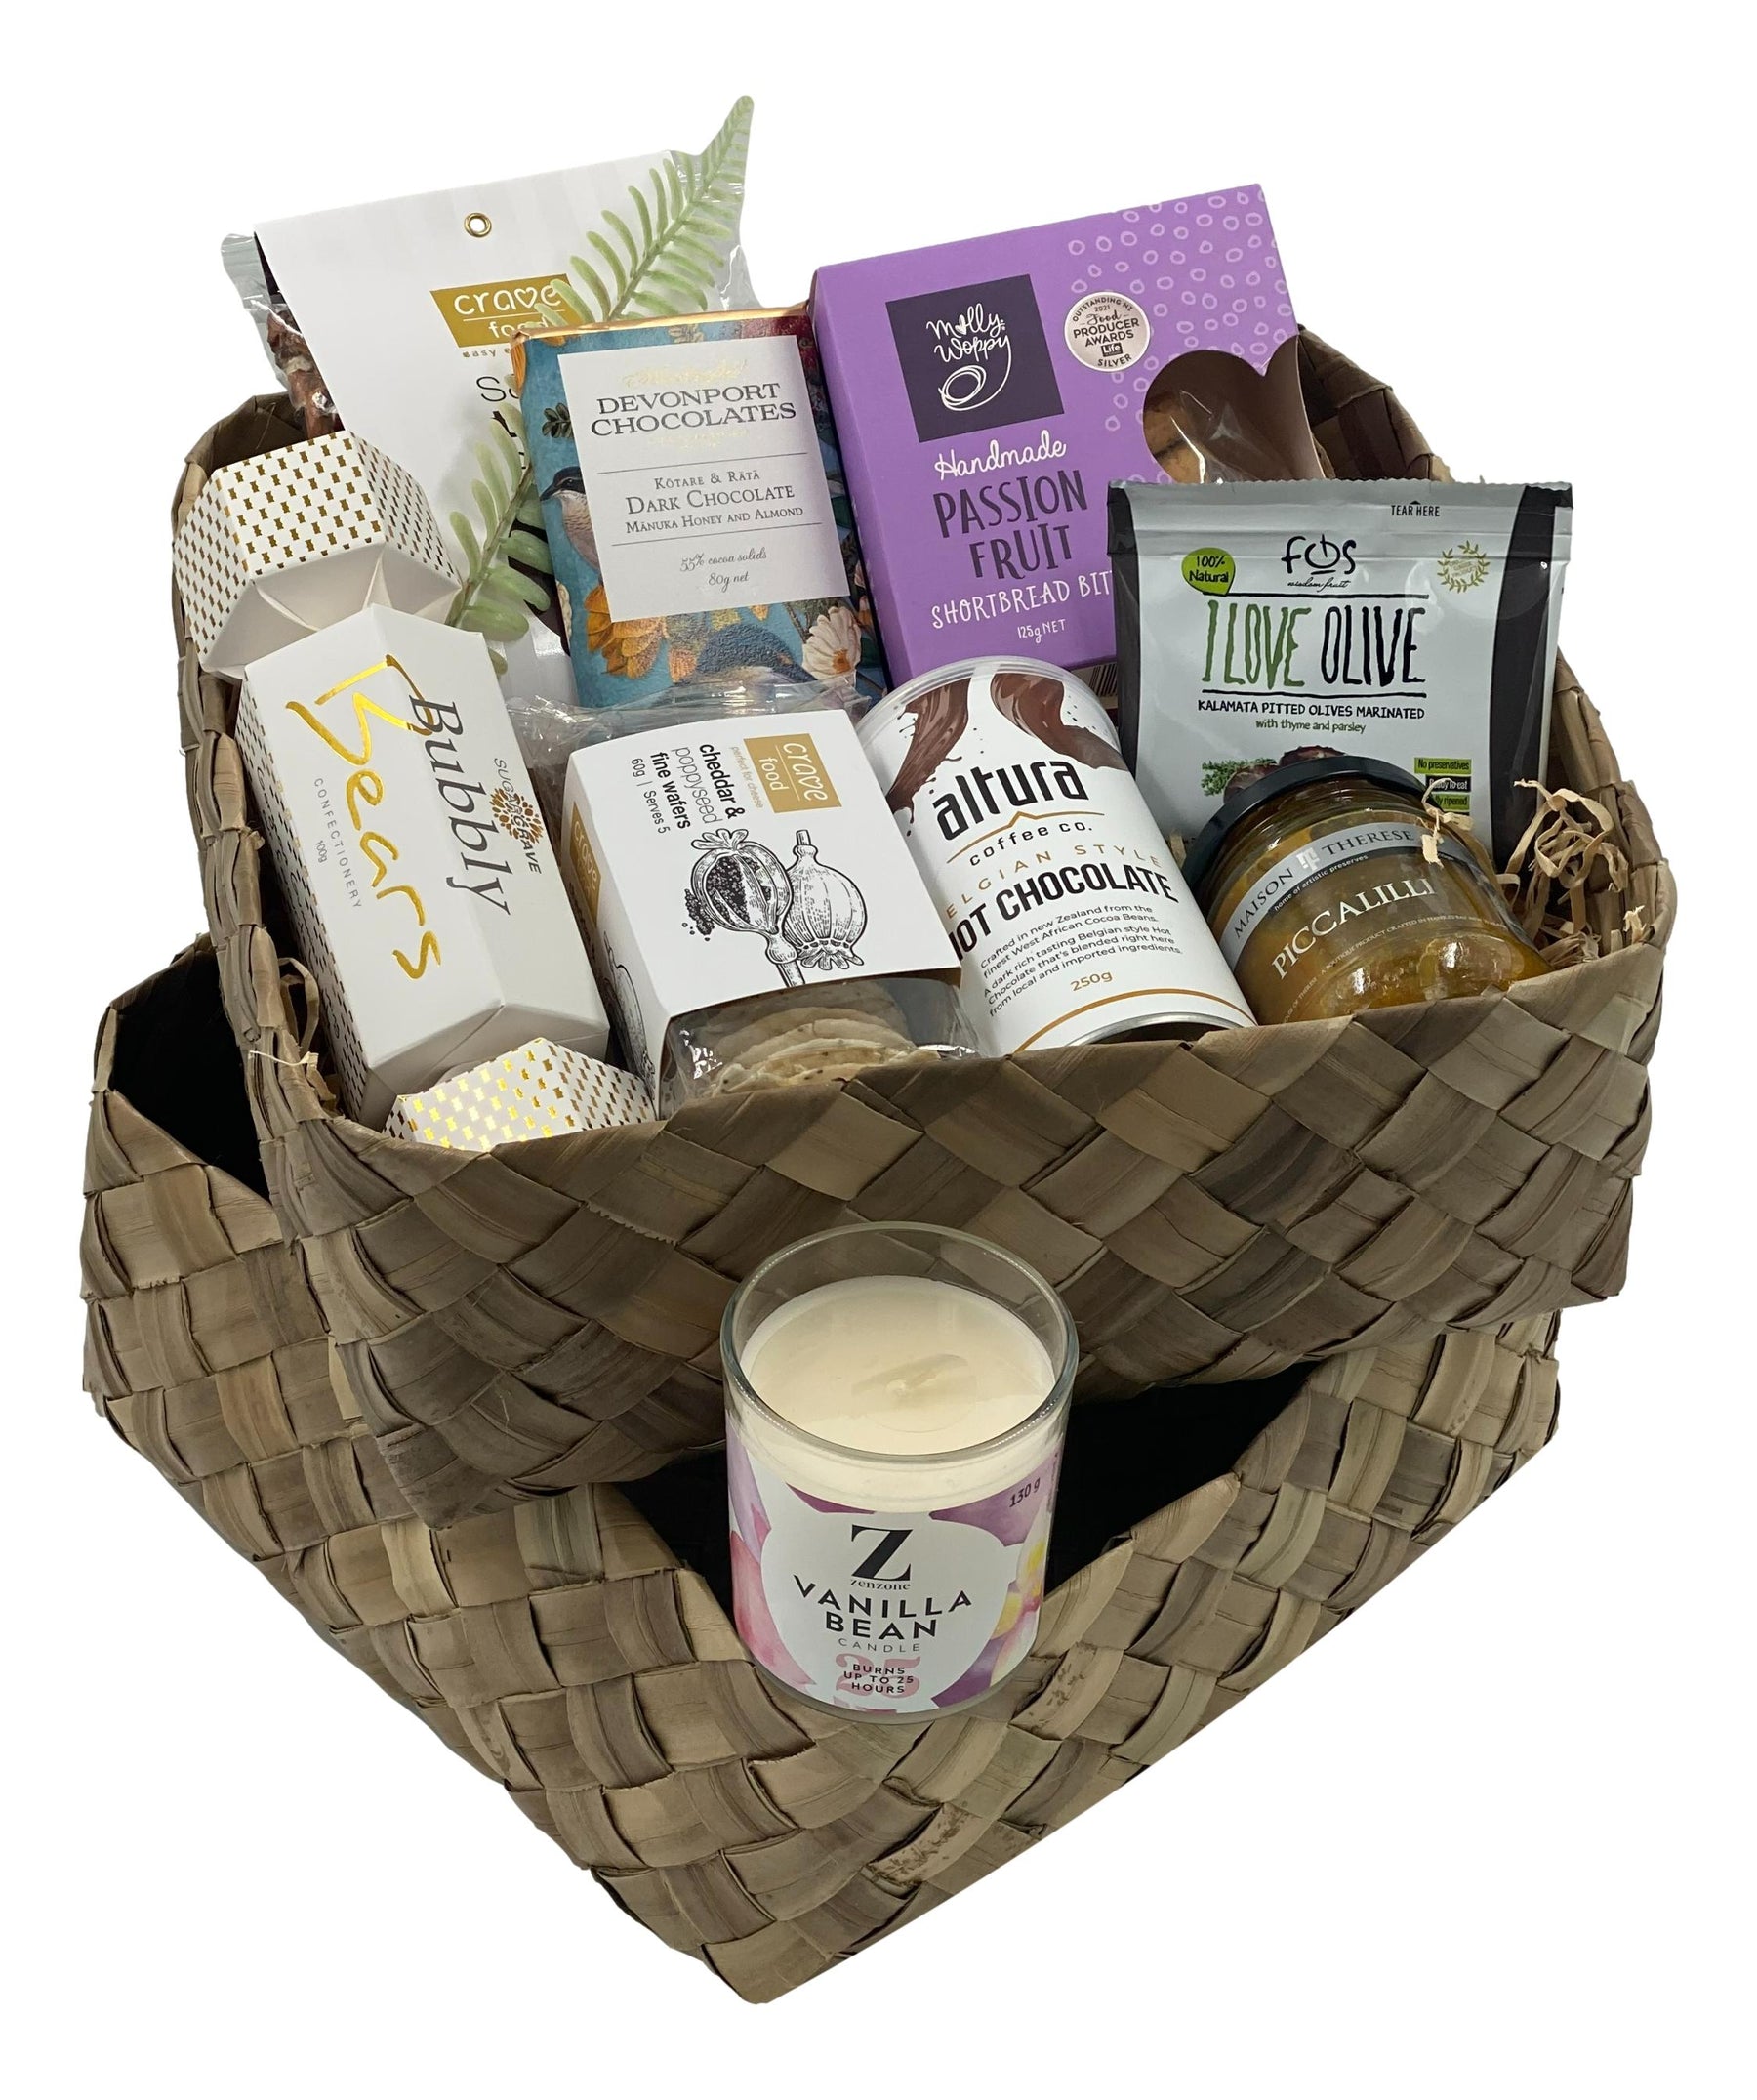 House Warming Gift Baskets and Gift Boxes, Real Estate Settlement Gifts - Basket Creations